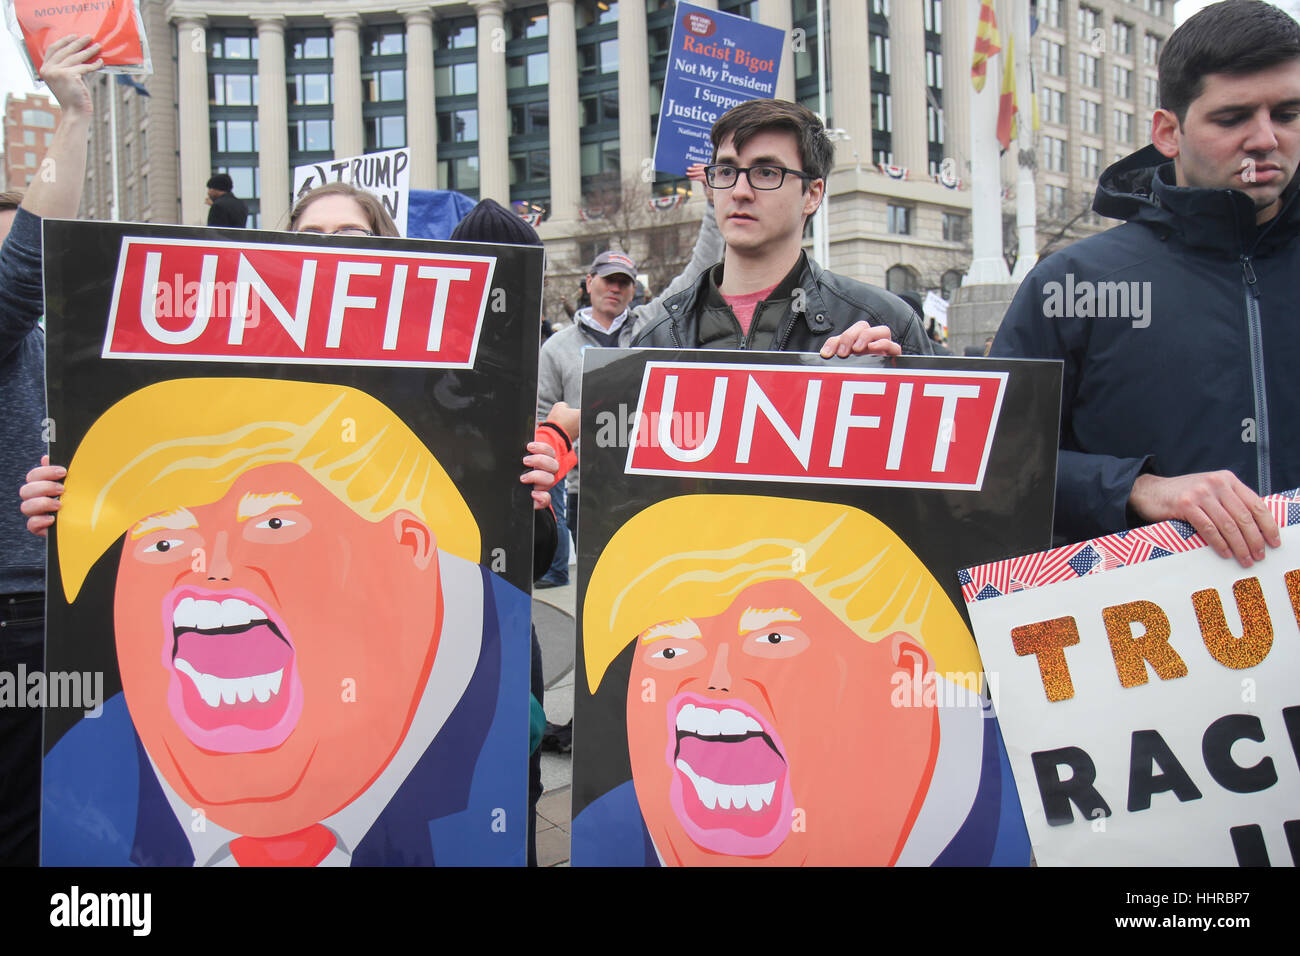 Washington, USA. 20th January, 2017. Protesters at a rally held by the ANSWER Coalition on the day of the inauguration of Donald J Trump as President of the United States. Credit: Susan Pease/Alamy Live News Stock Photo